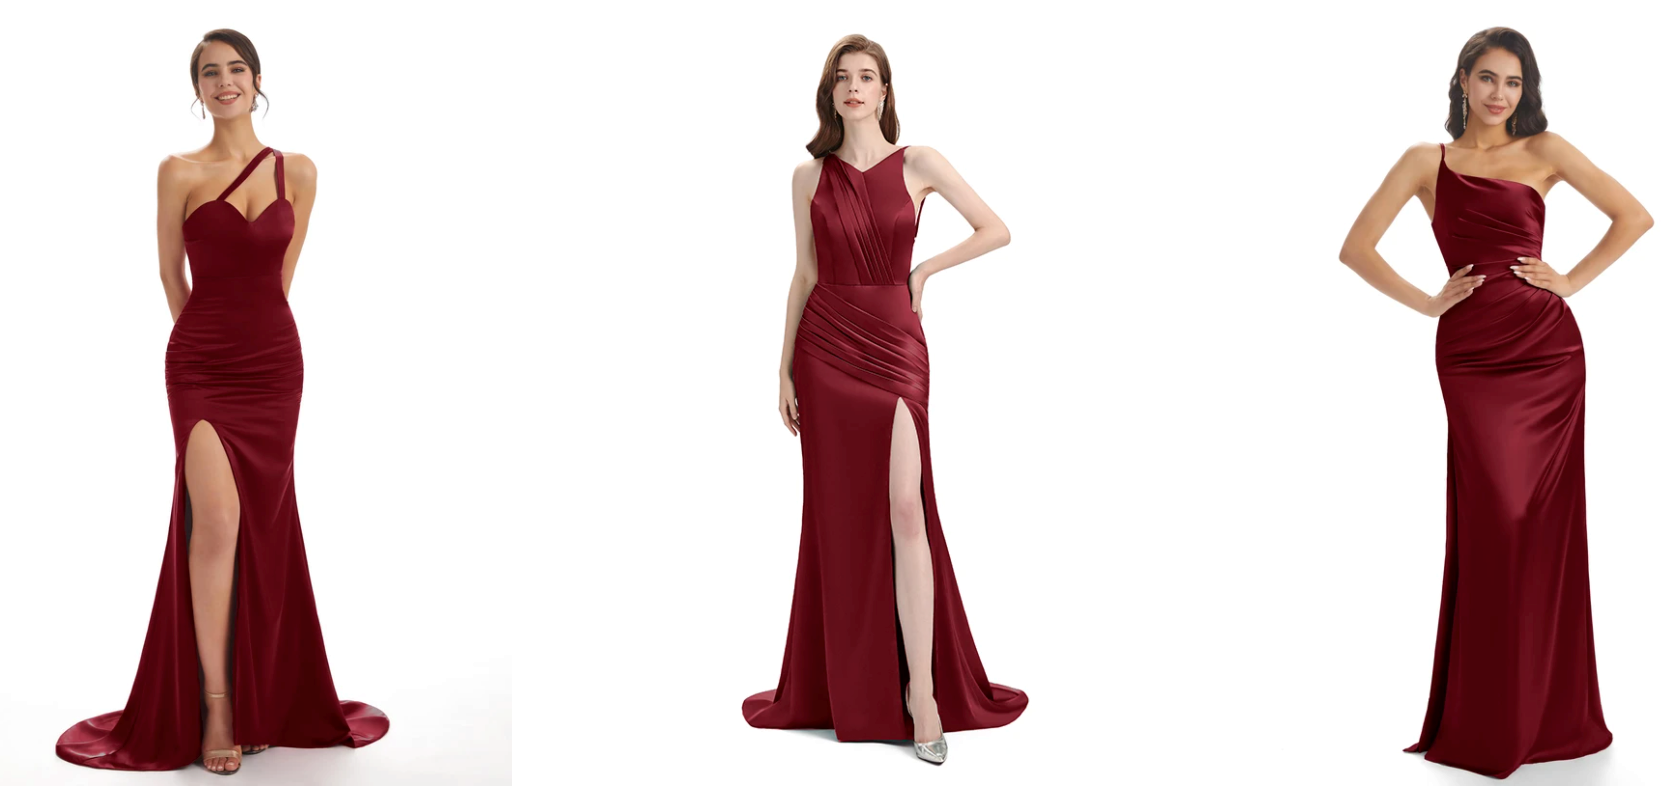 Advantages of Burgundy Satin Bridesmaid Dresses for Special Events